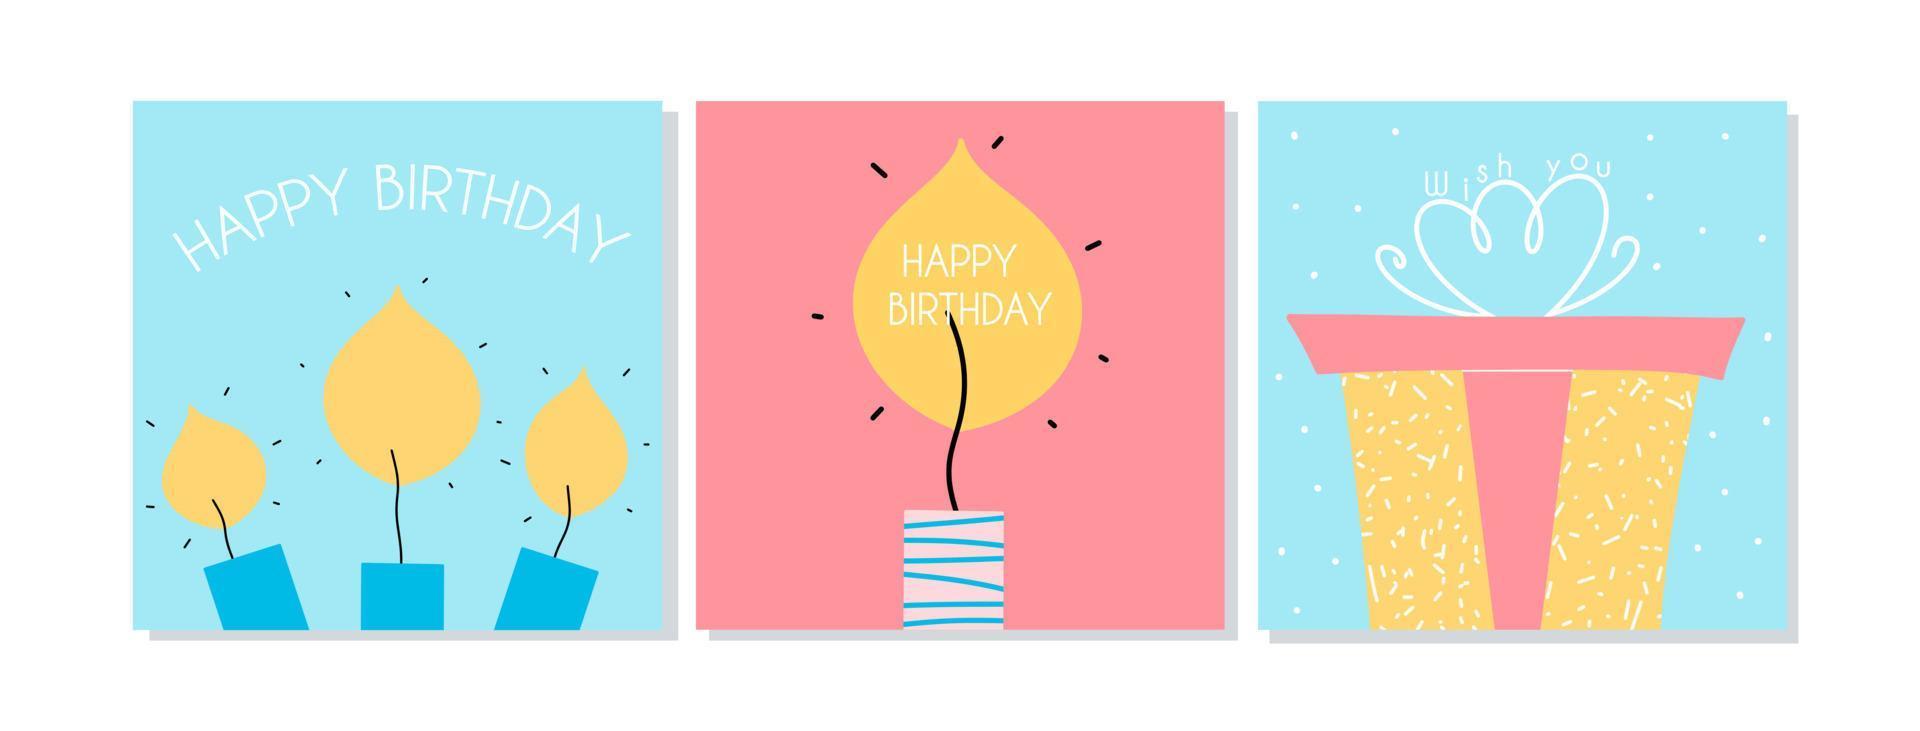 Flat design birthday cards with candles and holiday box. Vector illustration